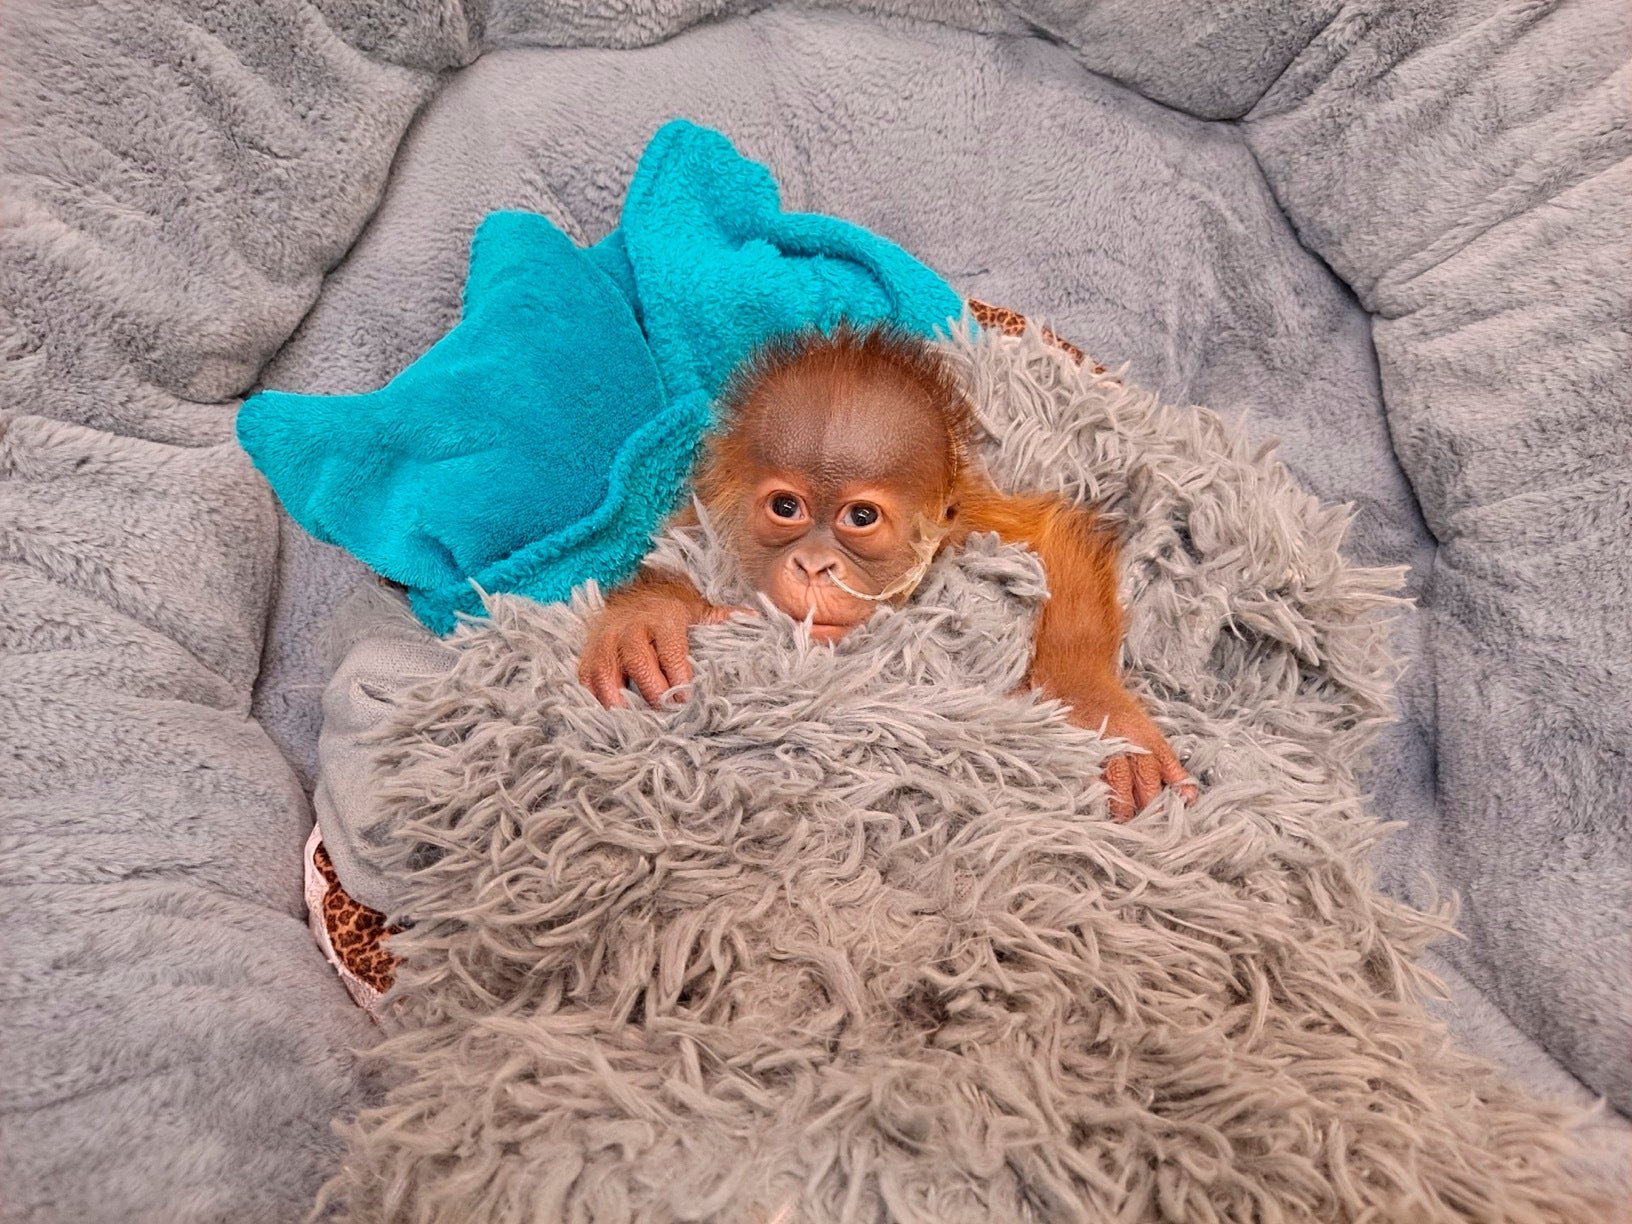 Bottle-fed baby orangutan at New Orleans zoo fascinates other apes